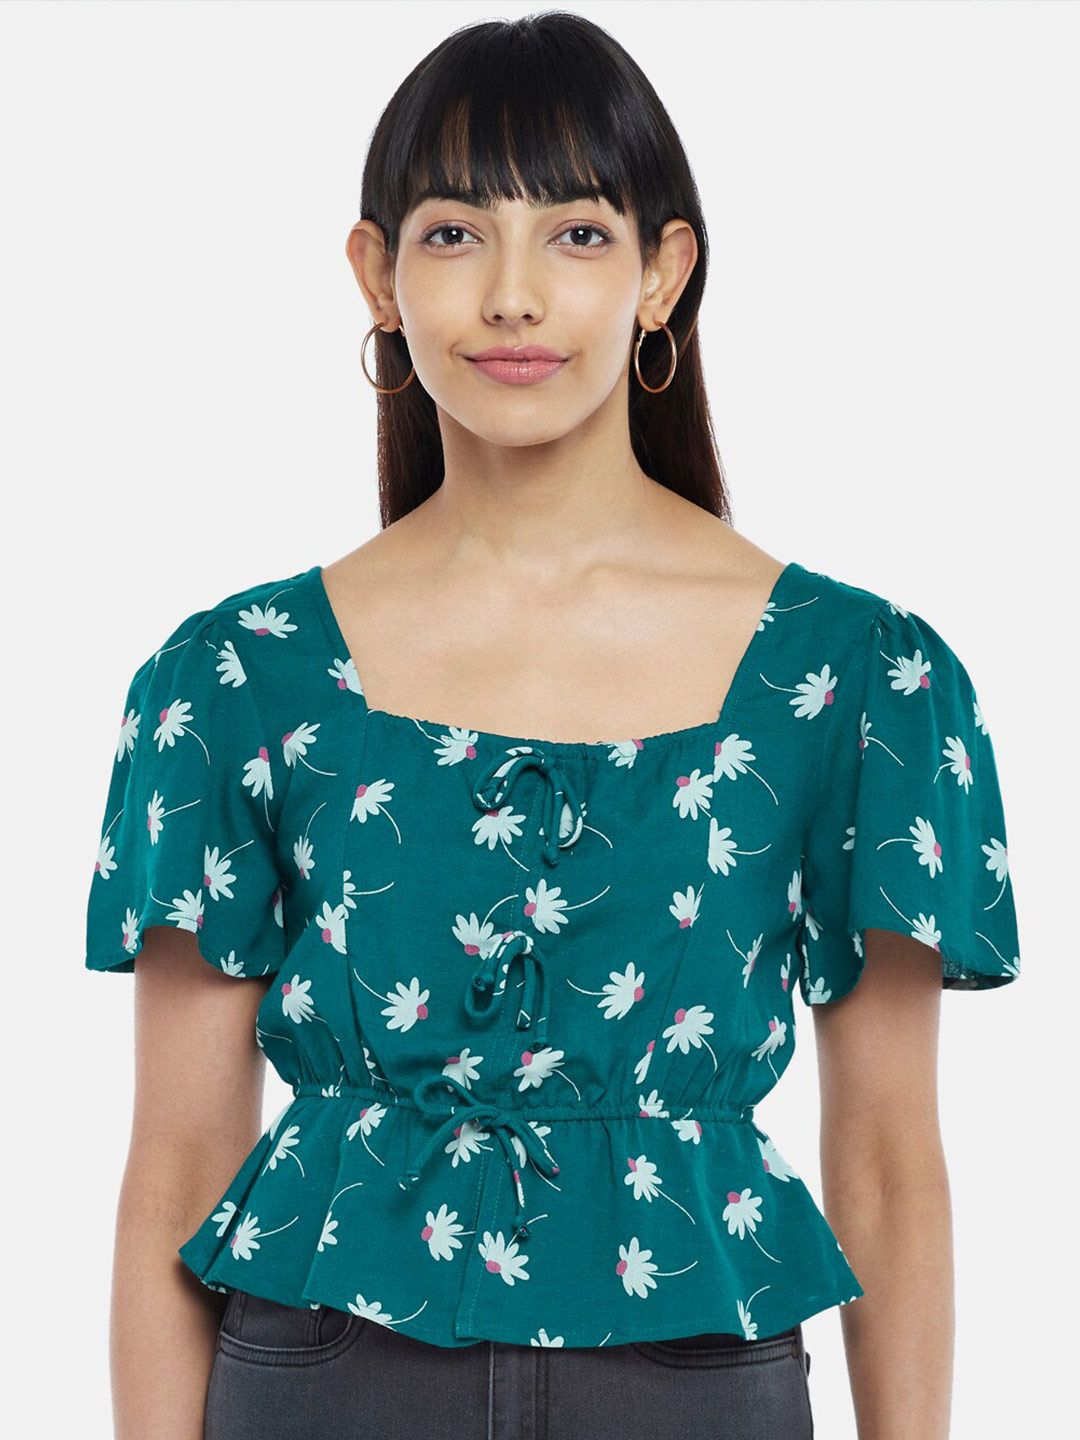 People Teal Floral Print Cinched Waist Top Price in India